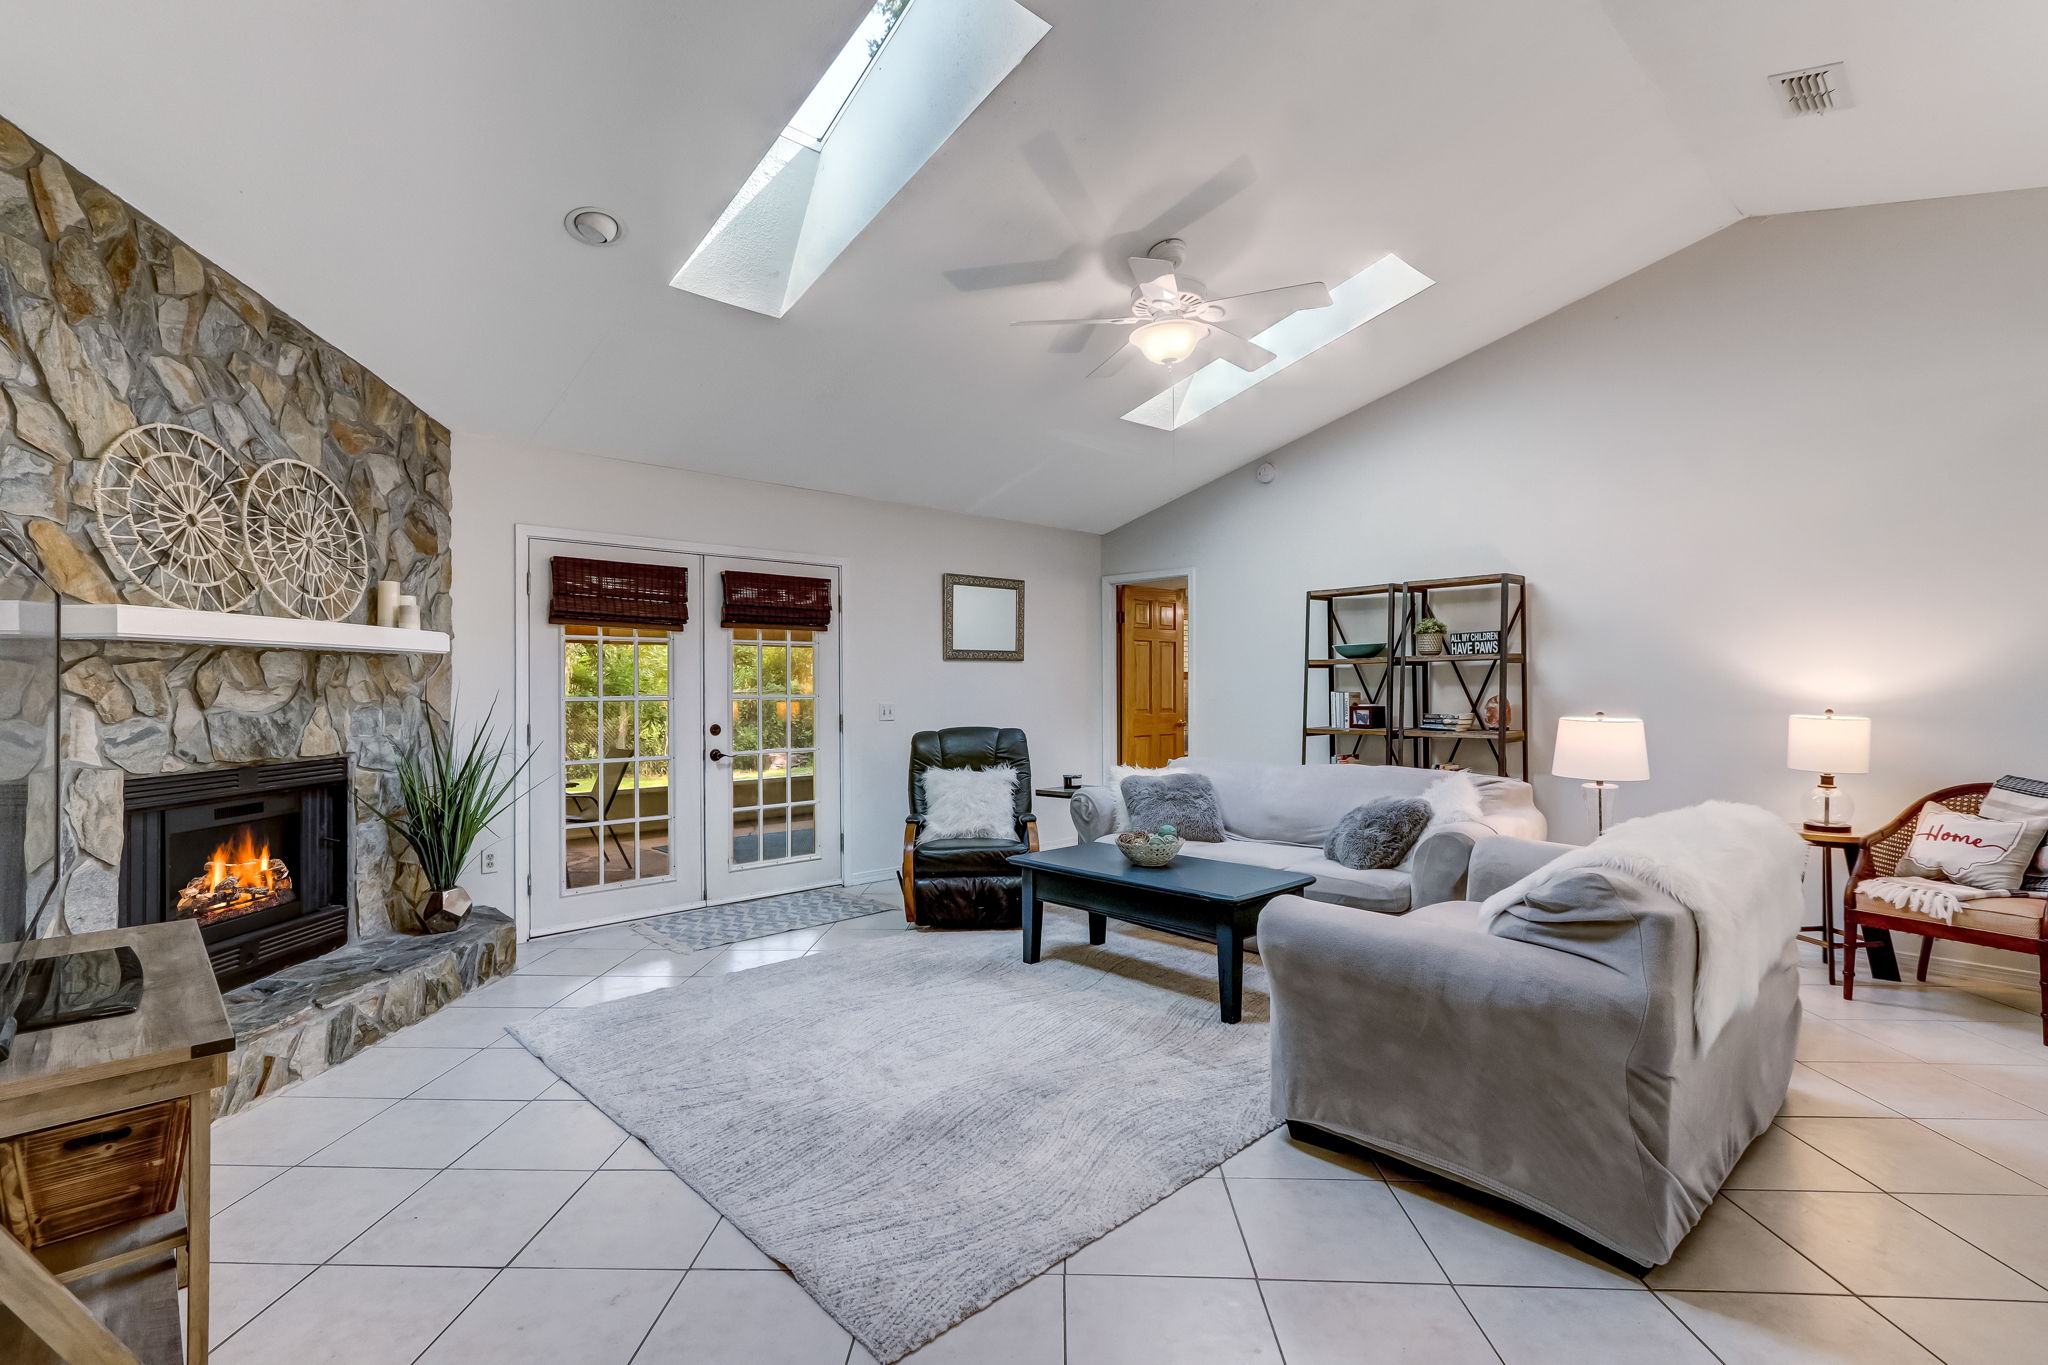 The living area is accented with skylights (recently replaced) and vaulted ceilings ...